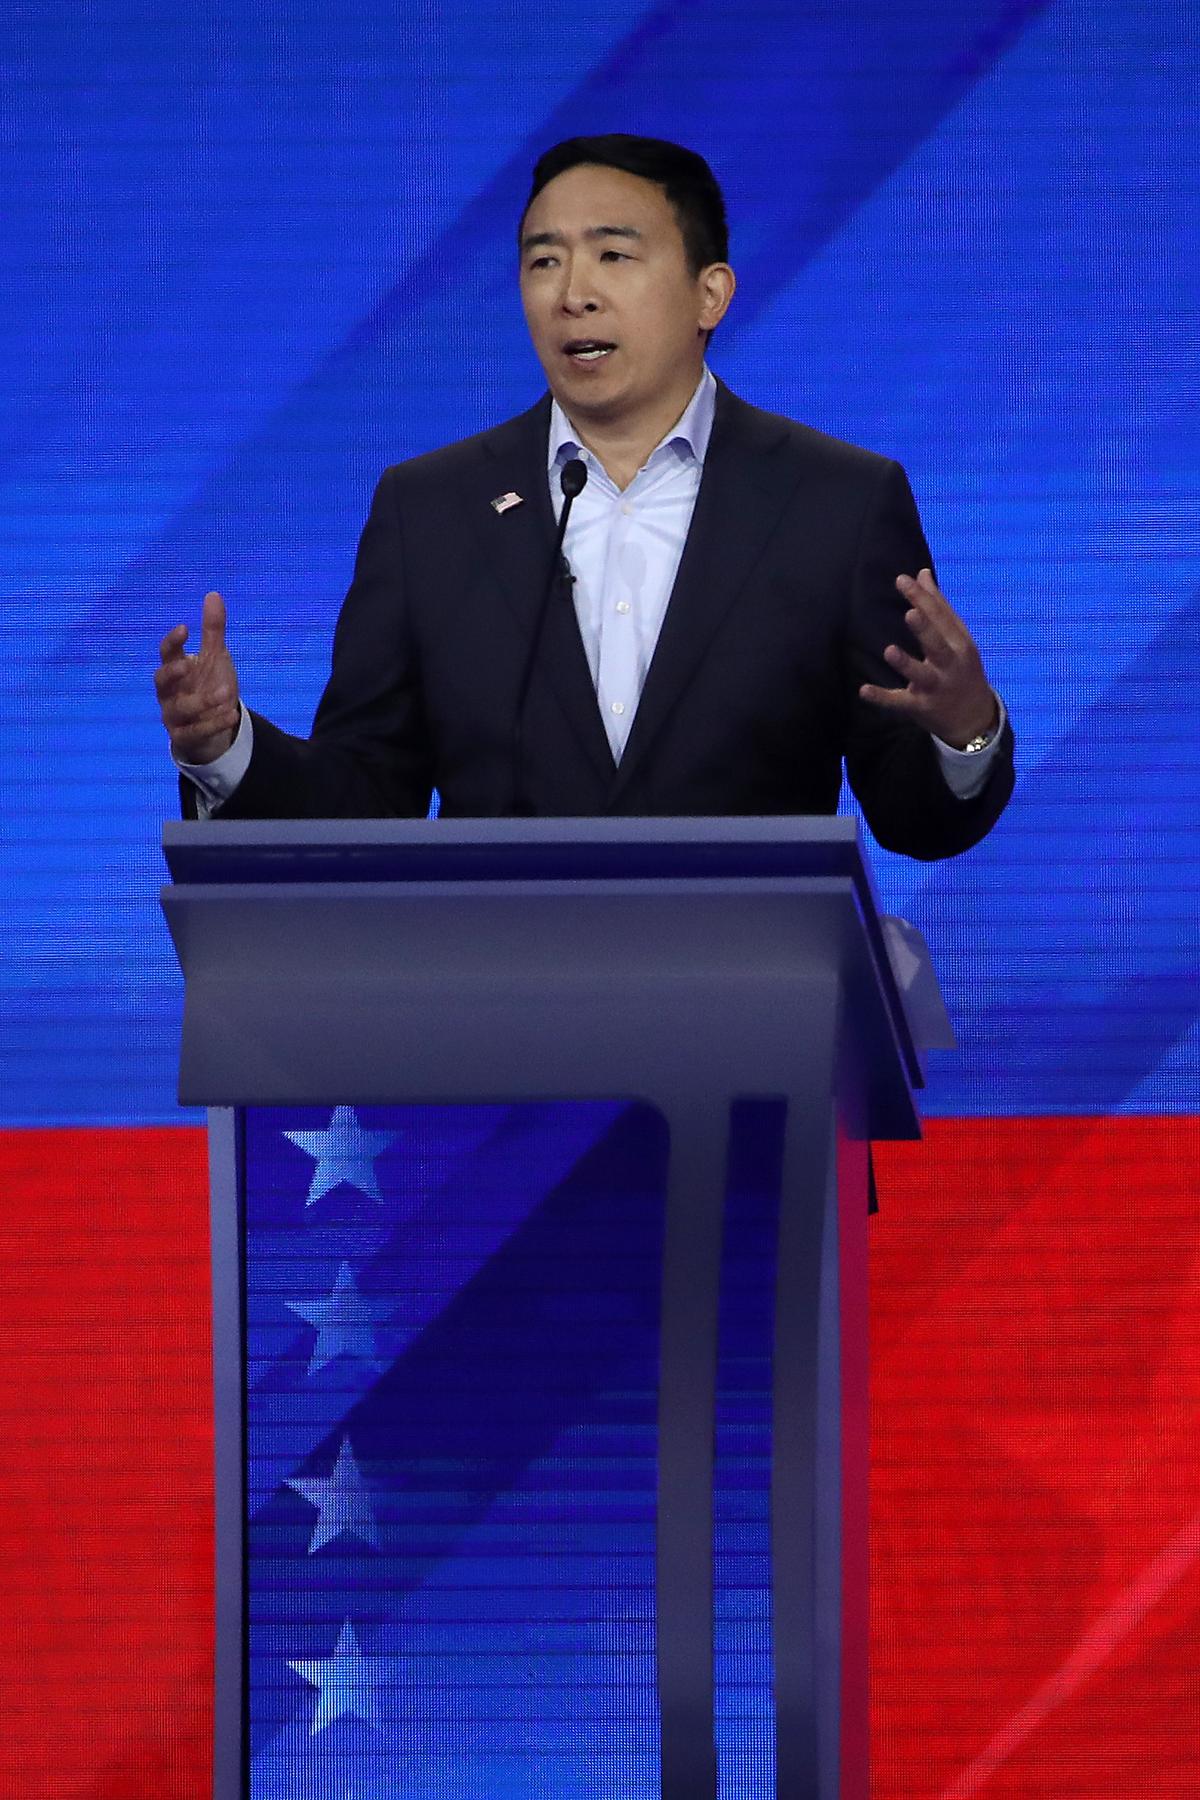 Democratic presidential candidate former tech executive Andrew Yang speaks during the 2020 presidential debate on Sept. 12, 2019. (Win McNamee/Getty Images)